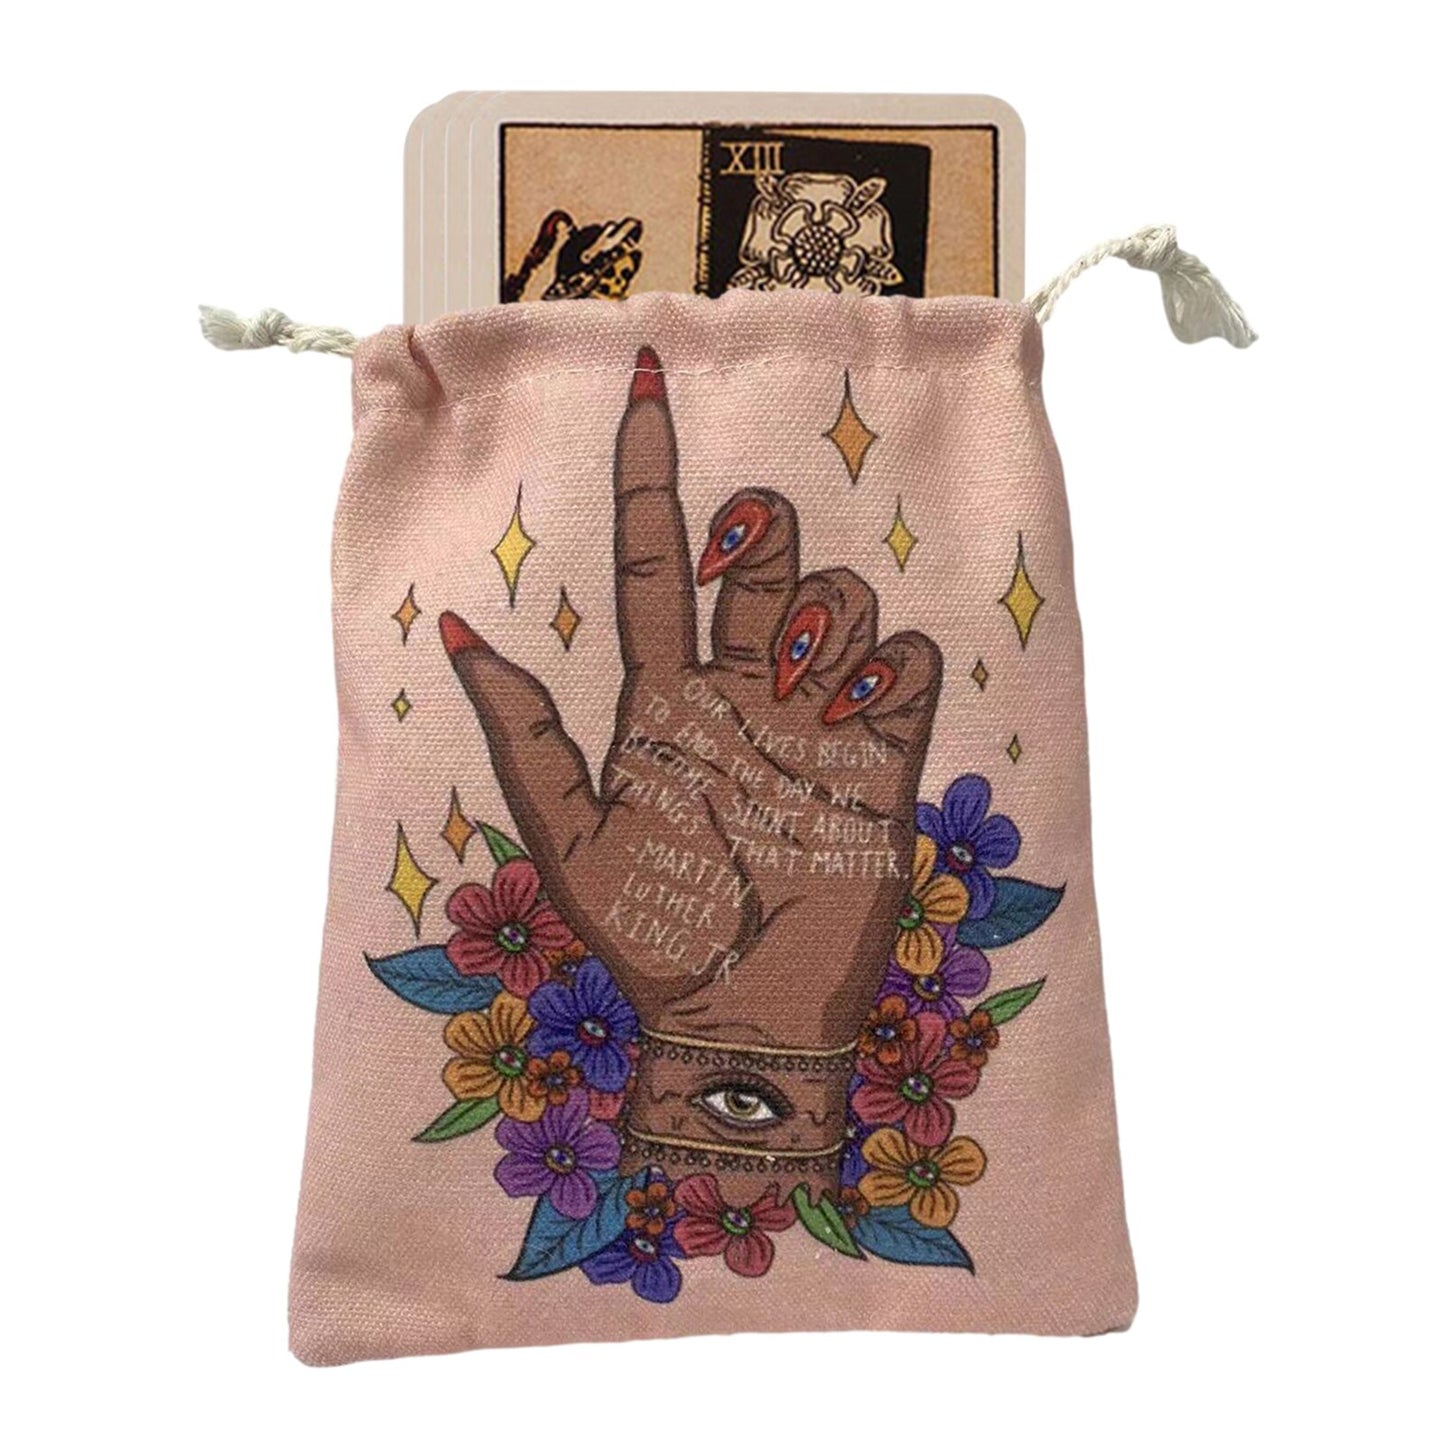 Eyes Hand Pattern Tarot Cards Storage Bag Tarot Card Deck Holder Pouch Drawstring Jewelry Board Games Dice Gift Bags Organizer